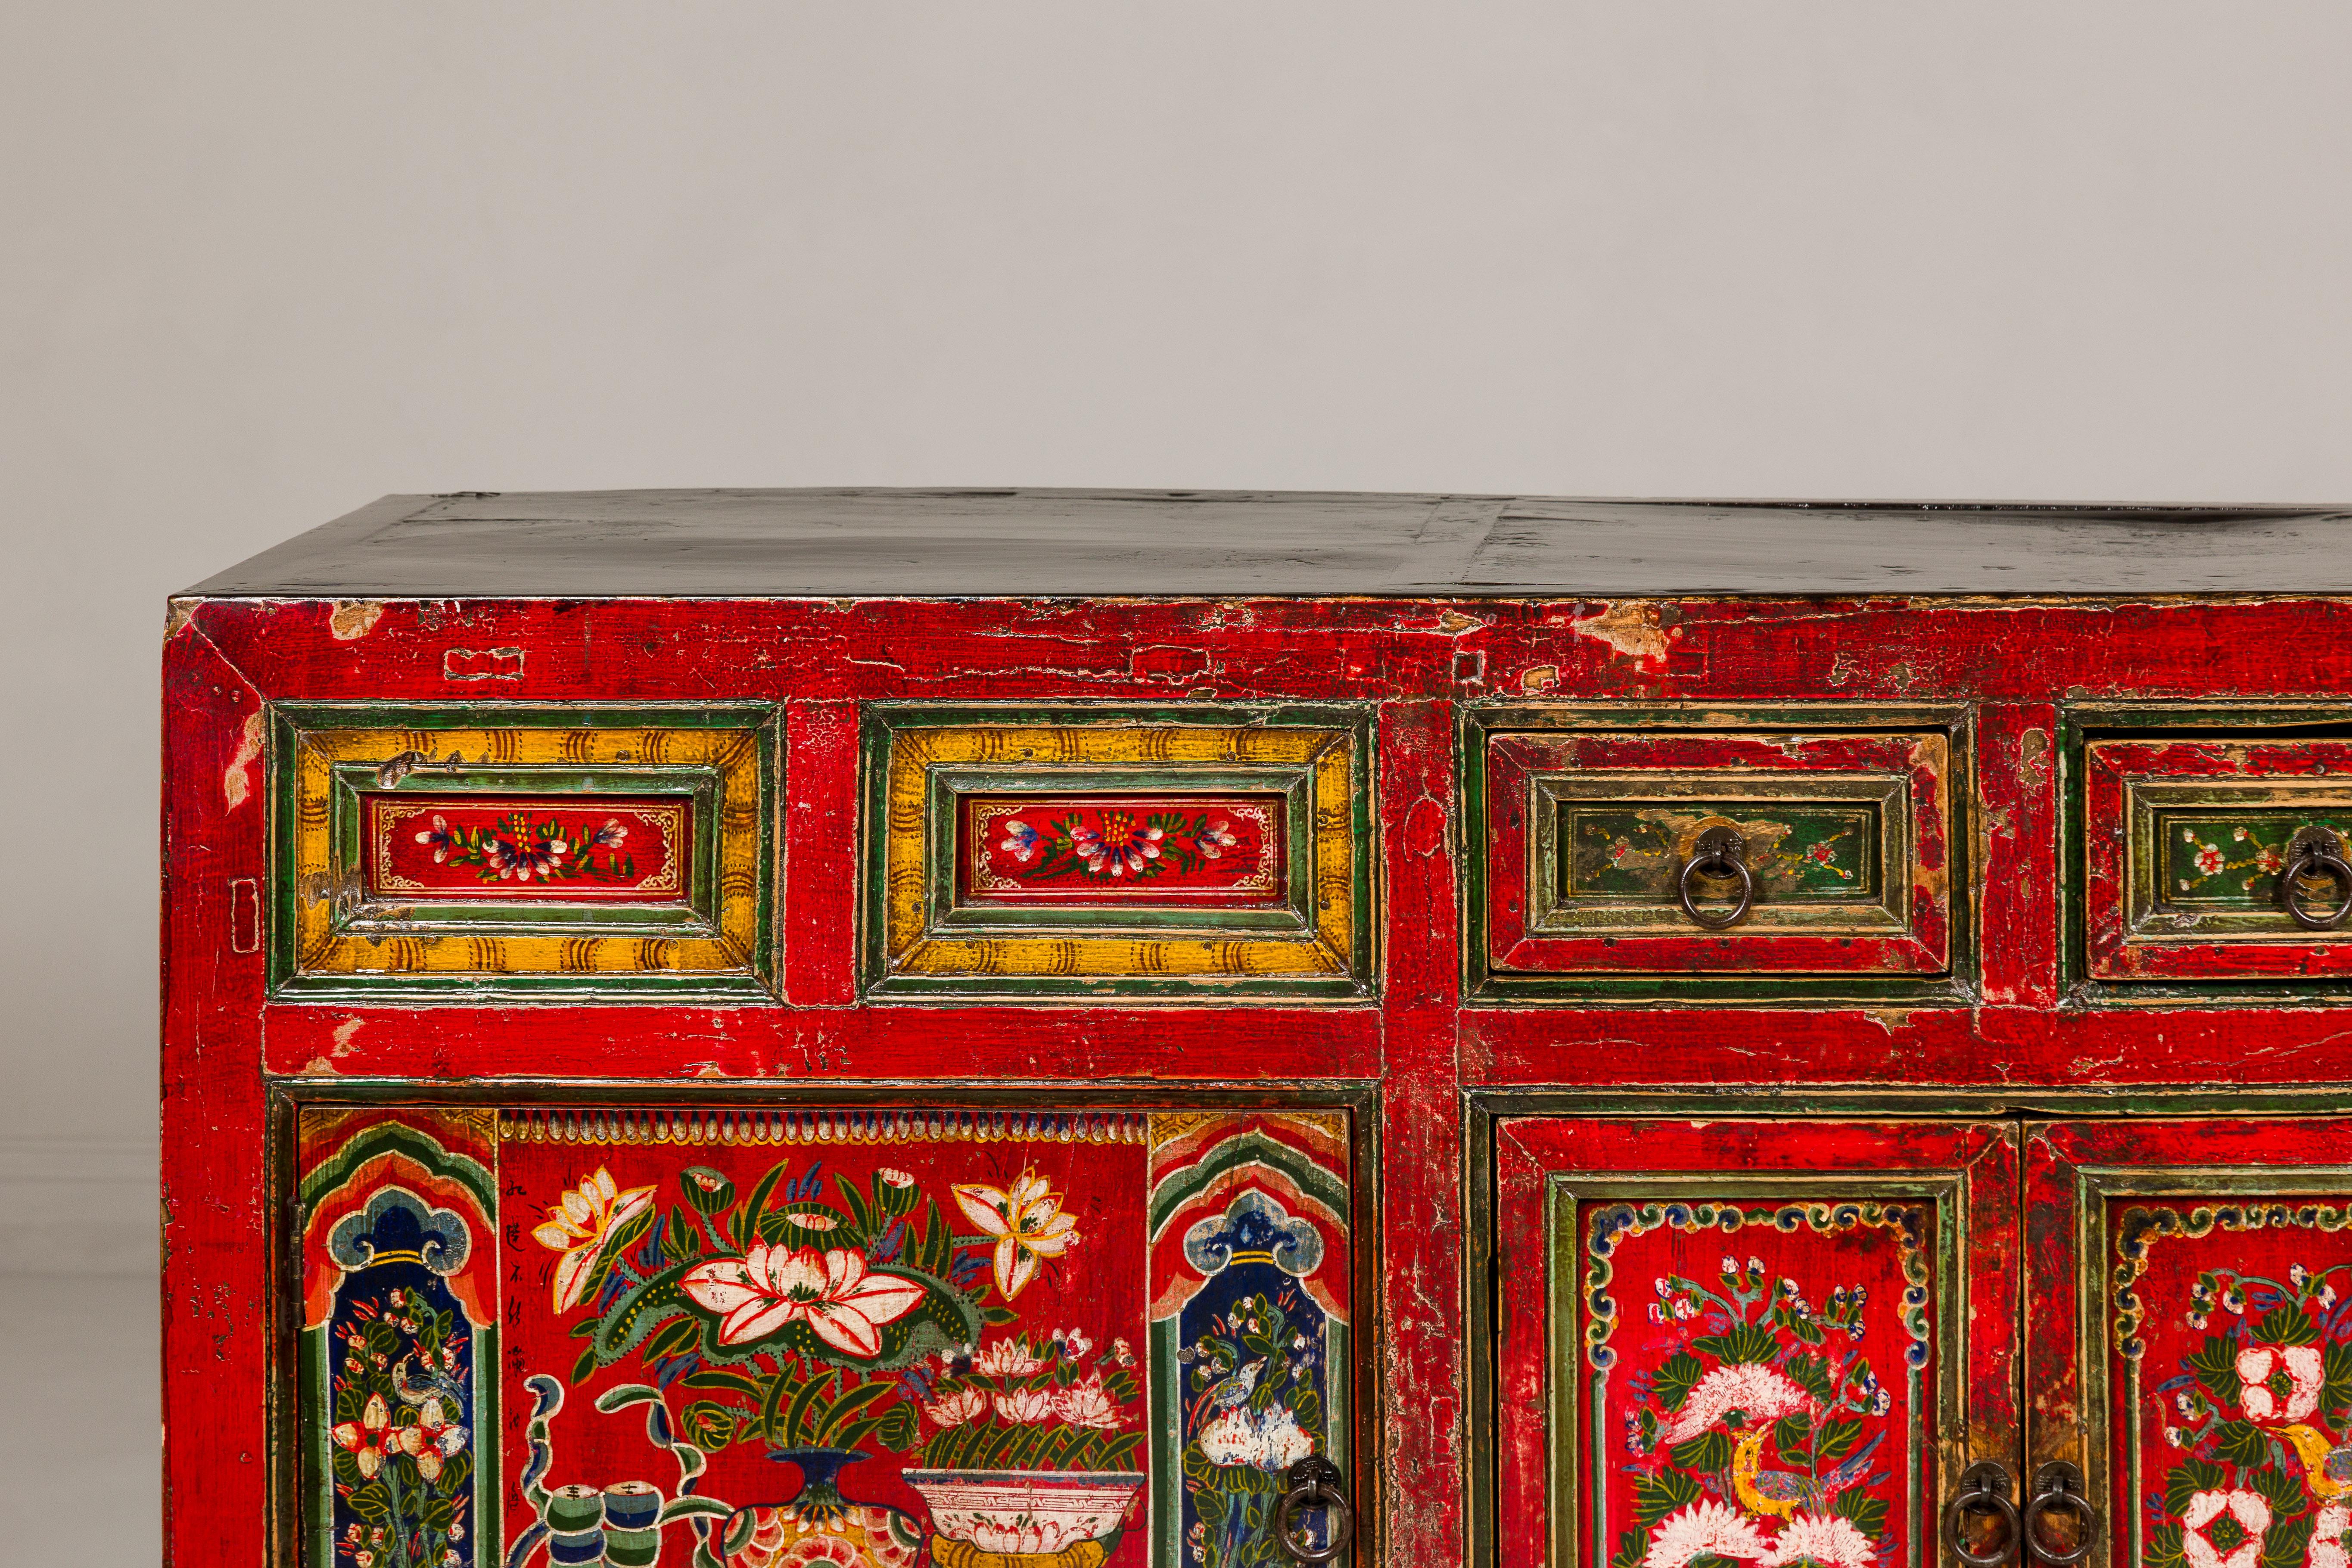 19th Century Mongolian Polychrome Sideboard with Doors, Drawers and Floral Décor In Good Condition For Sale In Yonkers, NY